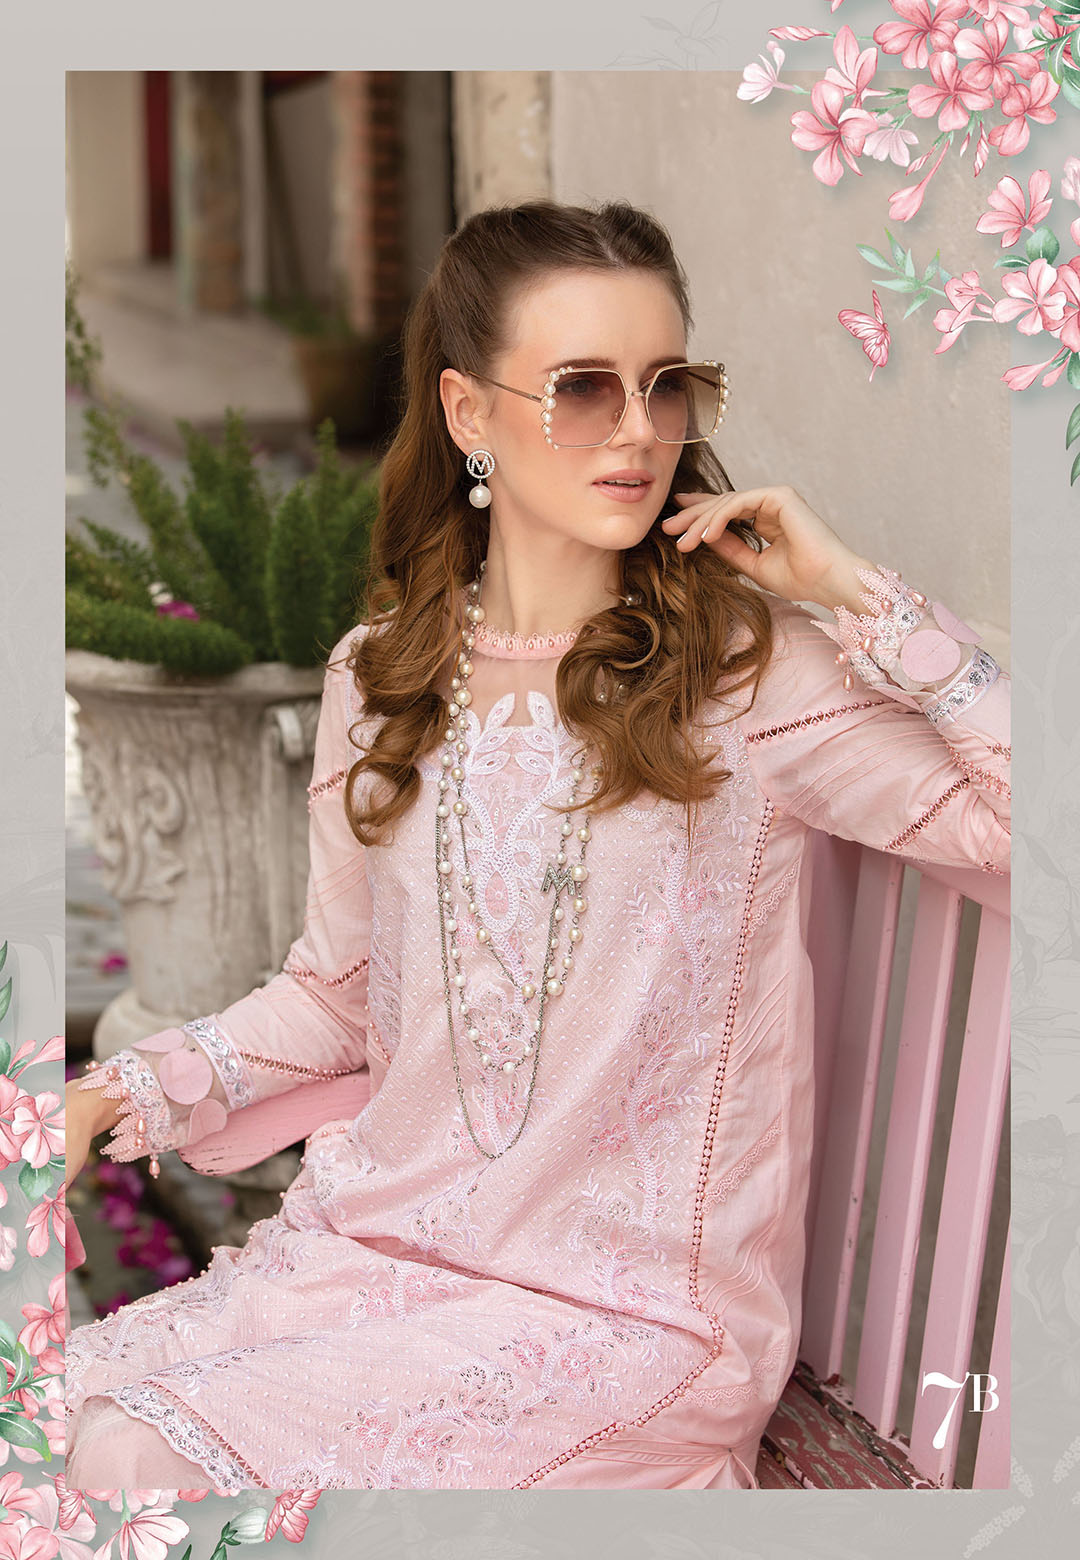 Buy Now, 7B - M Prints - Eid Edit 2023 - Maria. B in UK - Shahana Collection UK - Wedding and Bridal Party Dresses